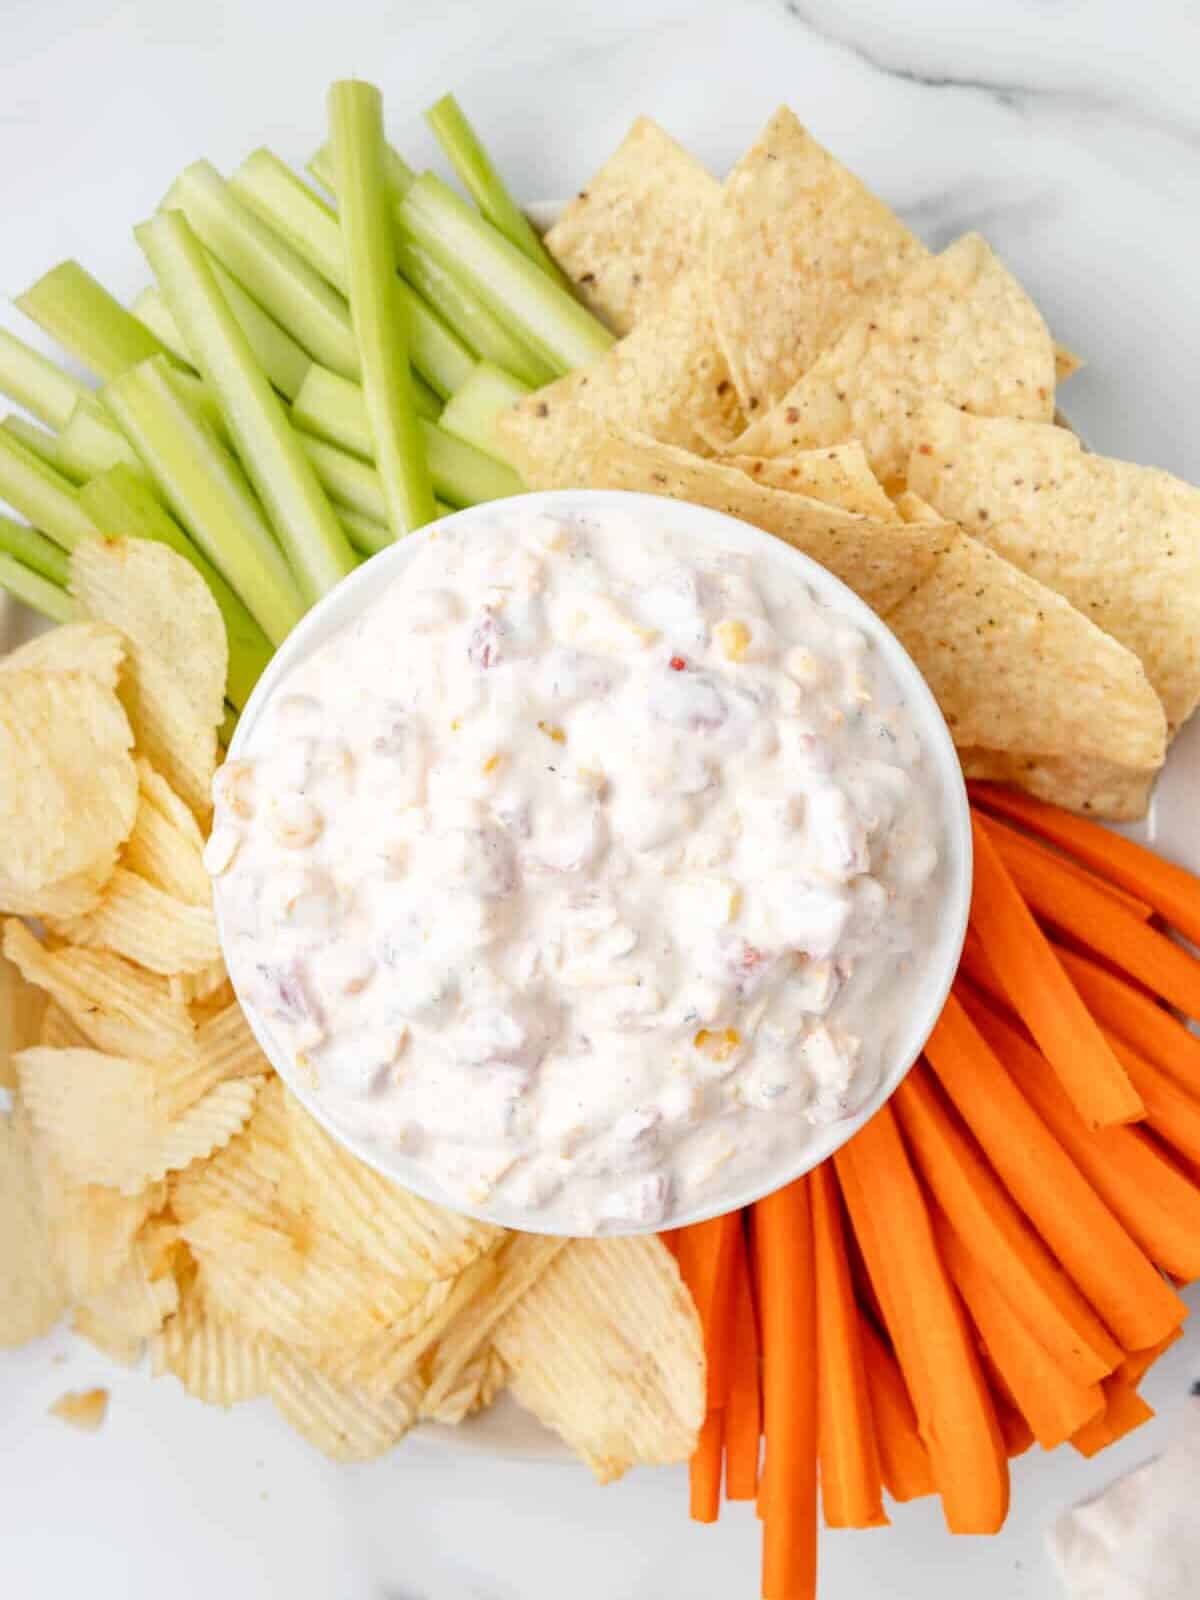 overhead view of fiesta ranch corn dip in a white bowl surrounded by wavy potato chips, carrot sticks, tortilla chips, and celery sticks.